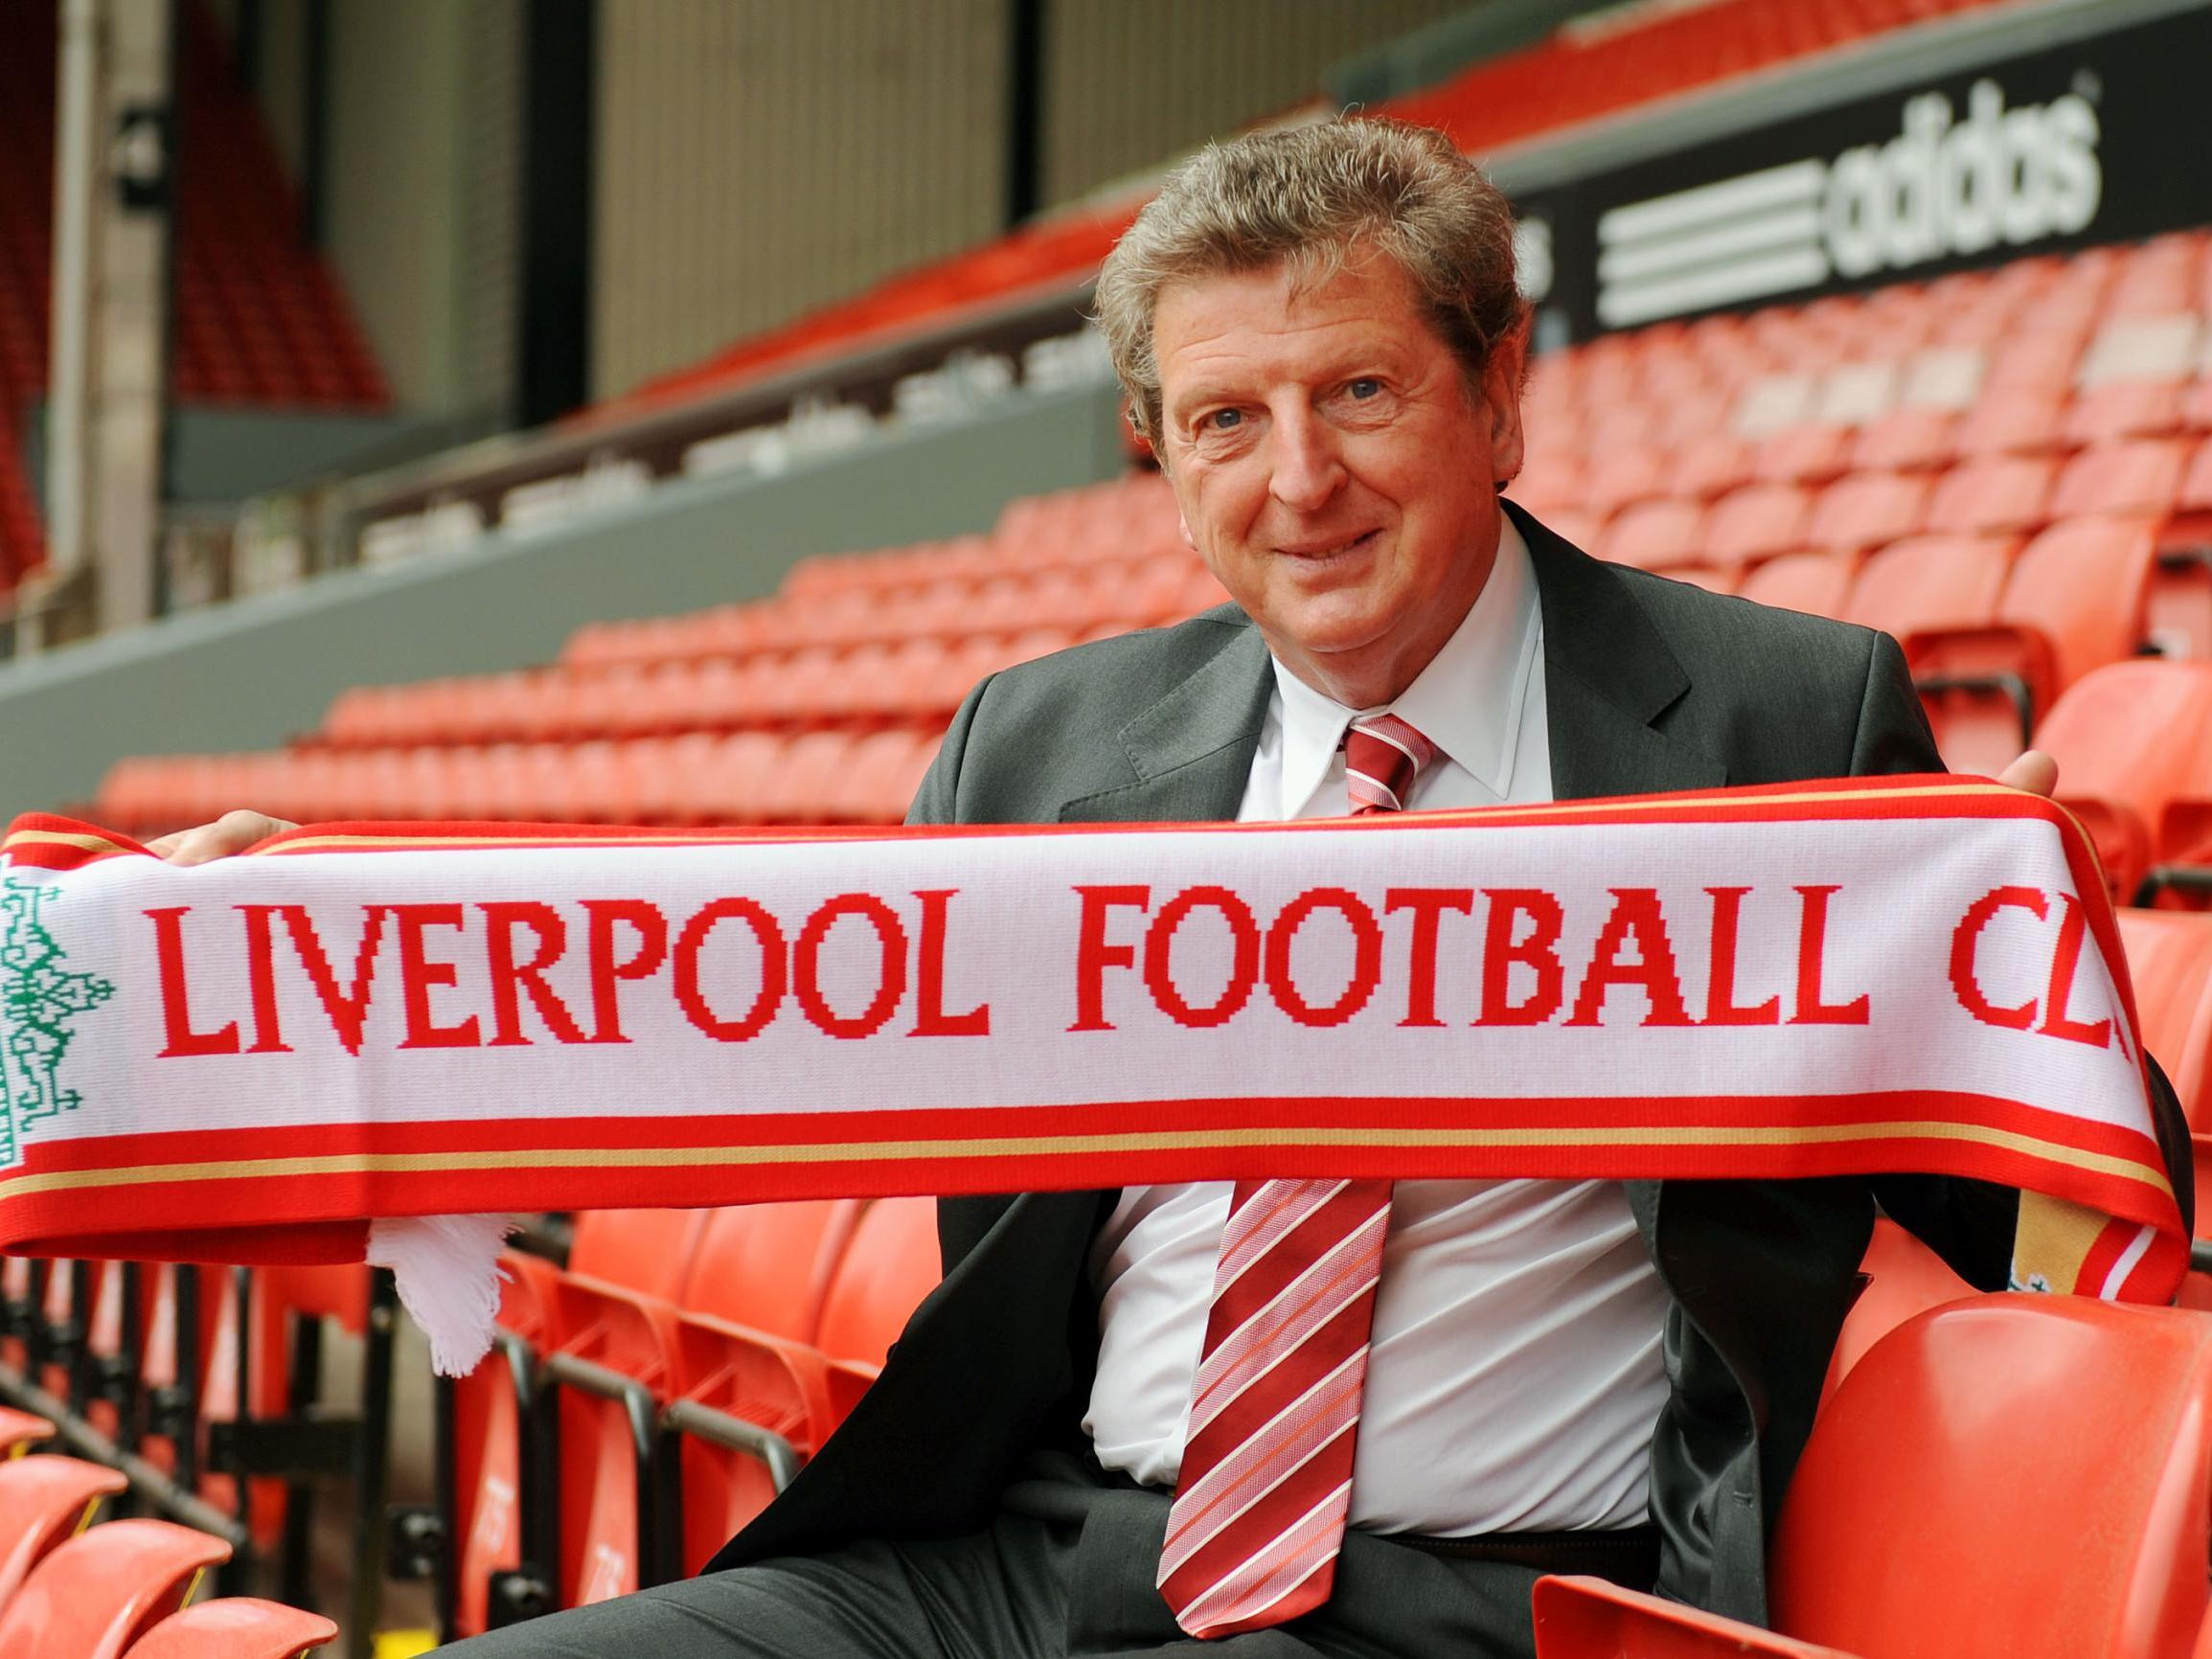 Roy Hodgson&apos;s troubled Liverpool reign: A story of muddled messages losing the hearts and minds of Anfield